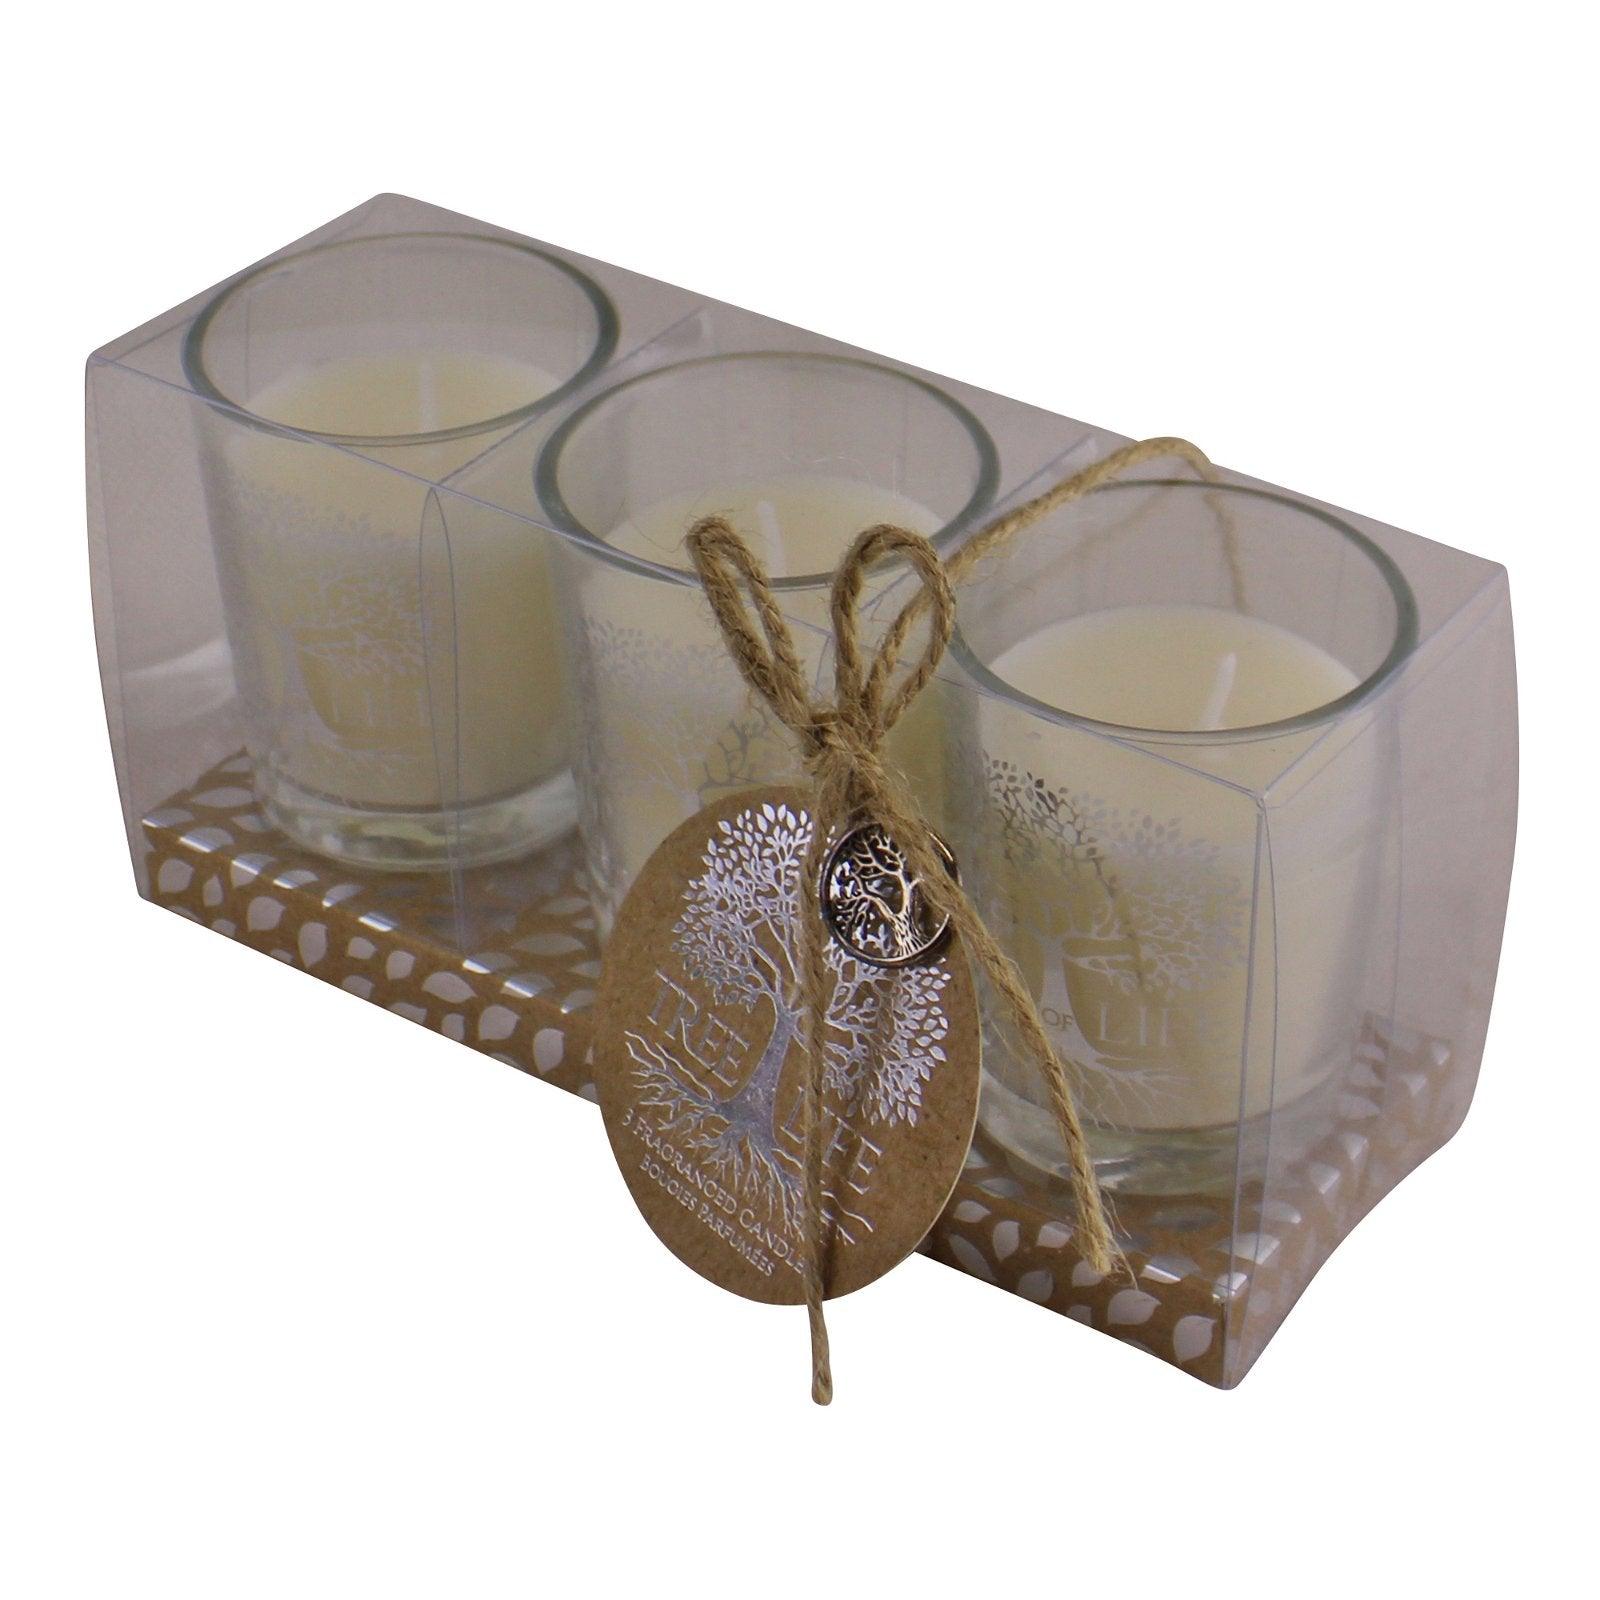 View Set Of 3 Tree Of Life Fragranced Votive Candles information